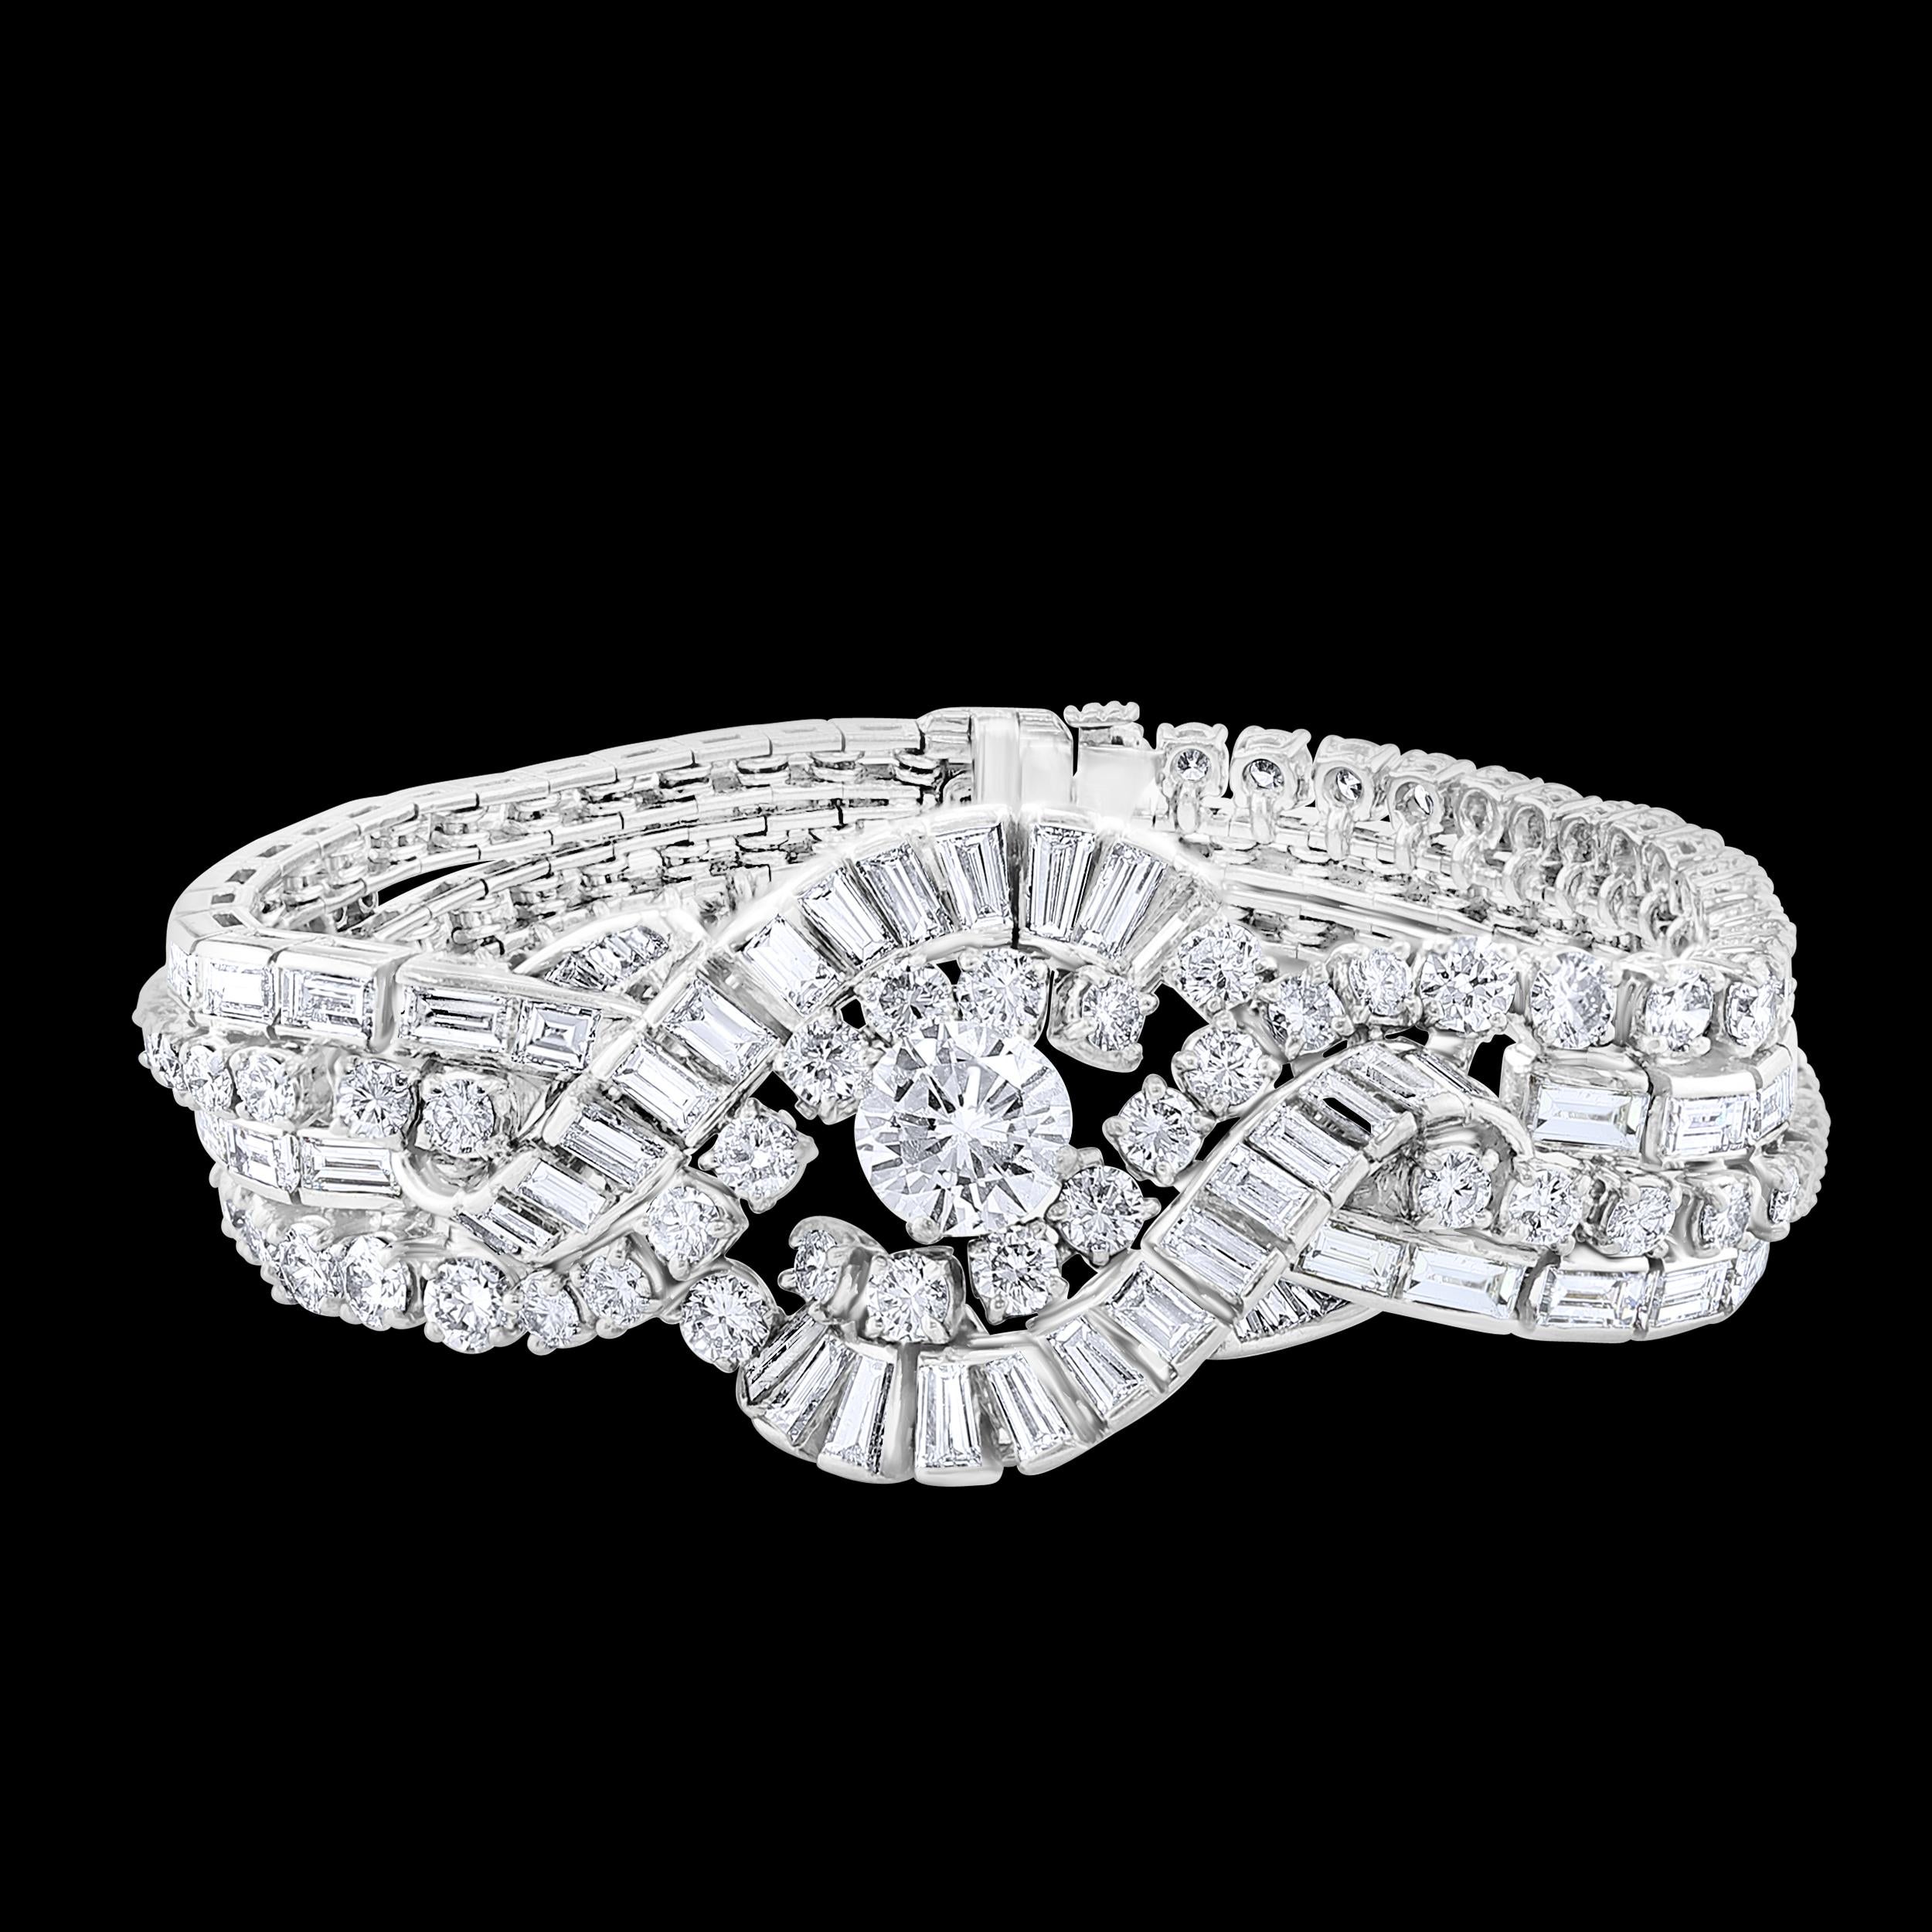 An Art Deco  Bracelet has a center Round shape solitaire diamond 1.79 ct , GIA Certified 
Total Carat weight is approximately 32 ct
Platinum 82 grams
Large size baguettes and brilliant cut round diamonds 
Its classy design and lustrous décor is